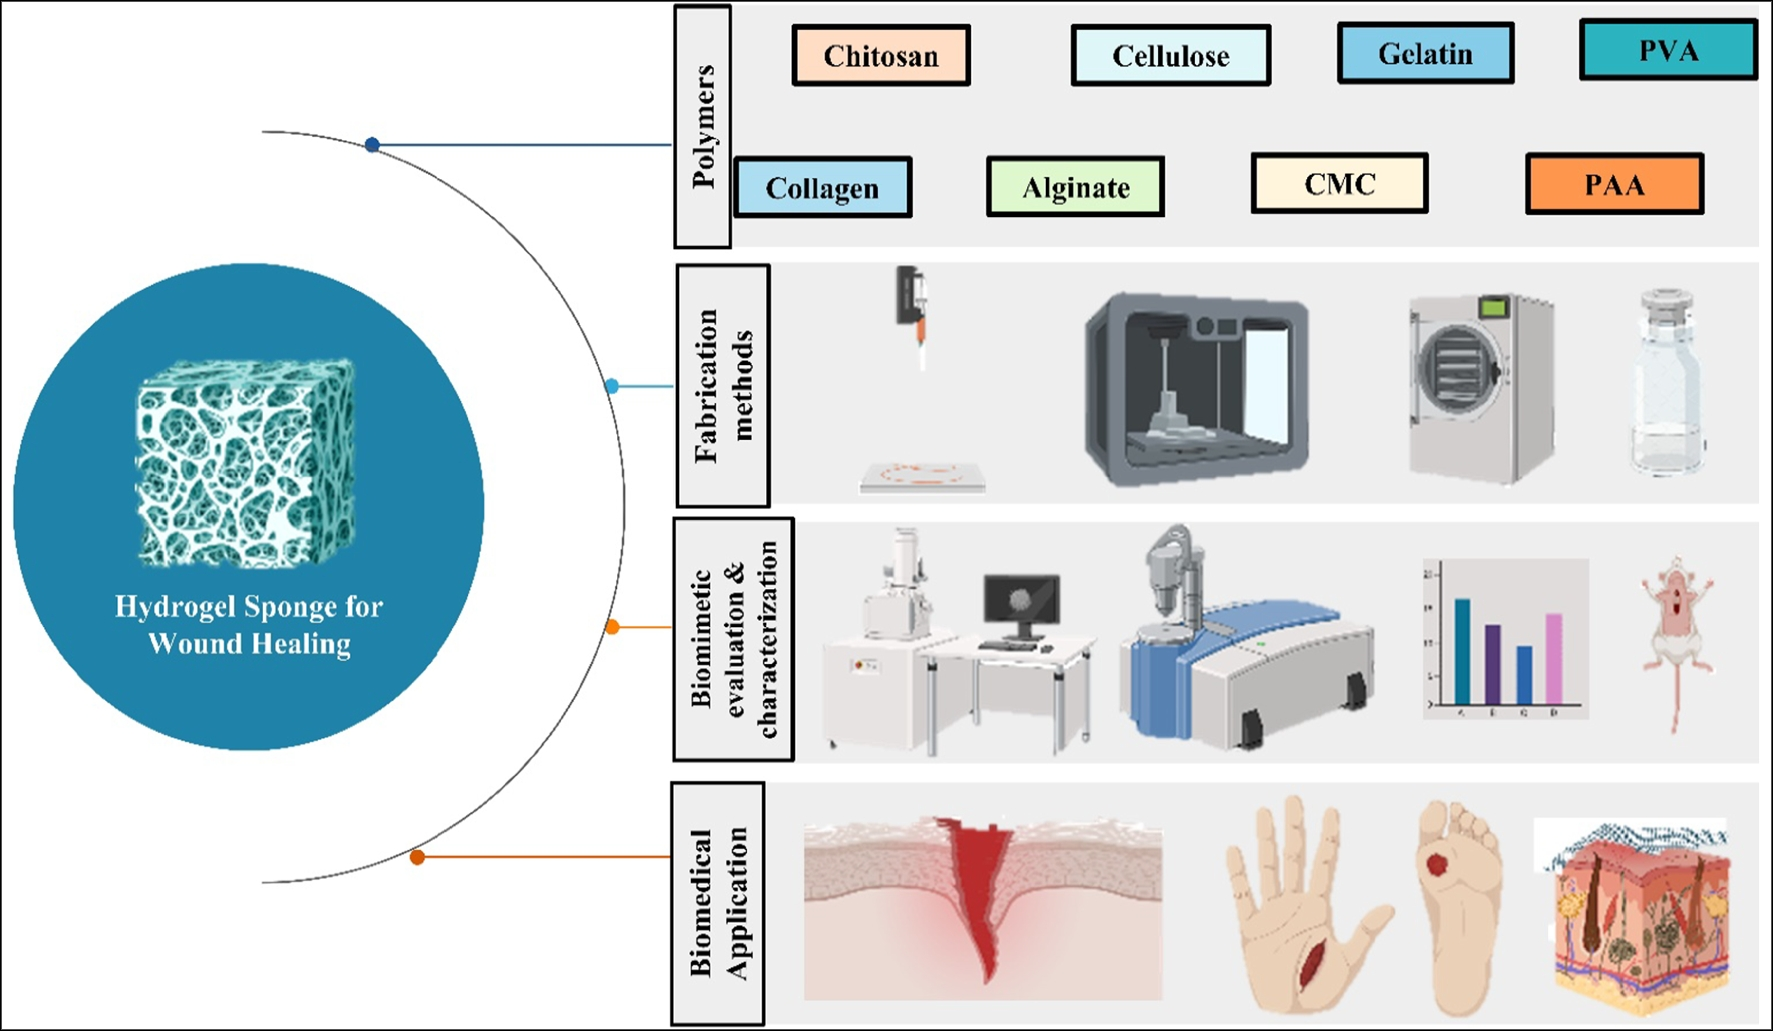 Polymeric Hydrogel Sponges for Wound Healing Applications: A Comprehensive Review